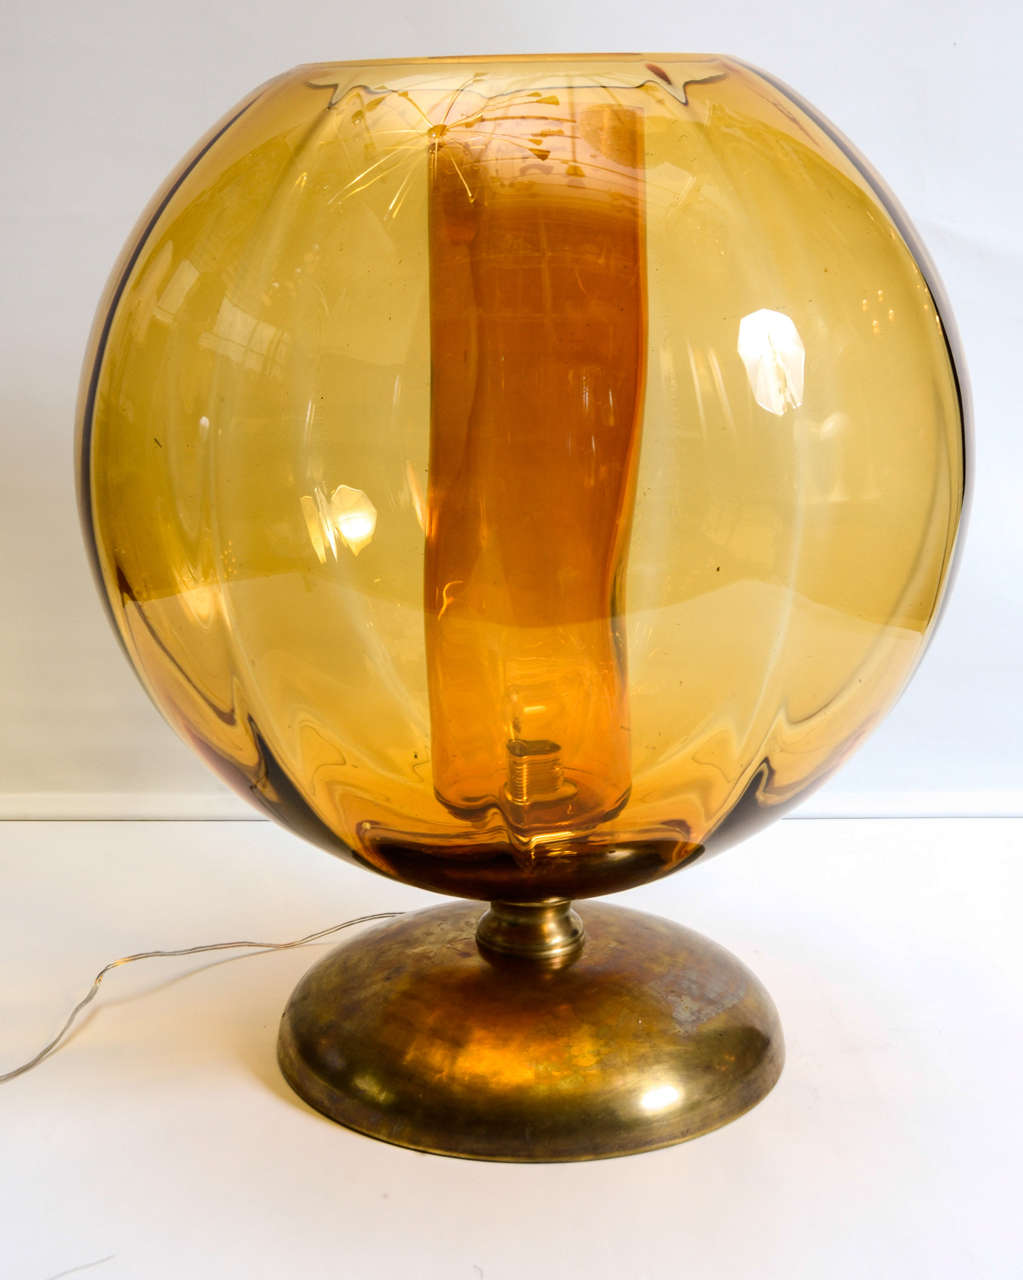 Pair of Big lamps made of brass feet, a big Murano glass globe and a cylinder in the same glass and color. New electrification, perfect condition.